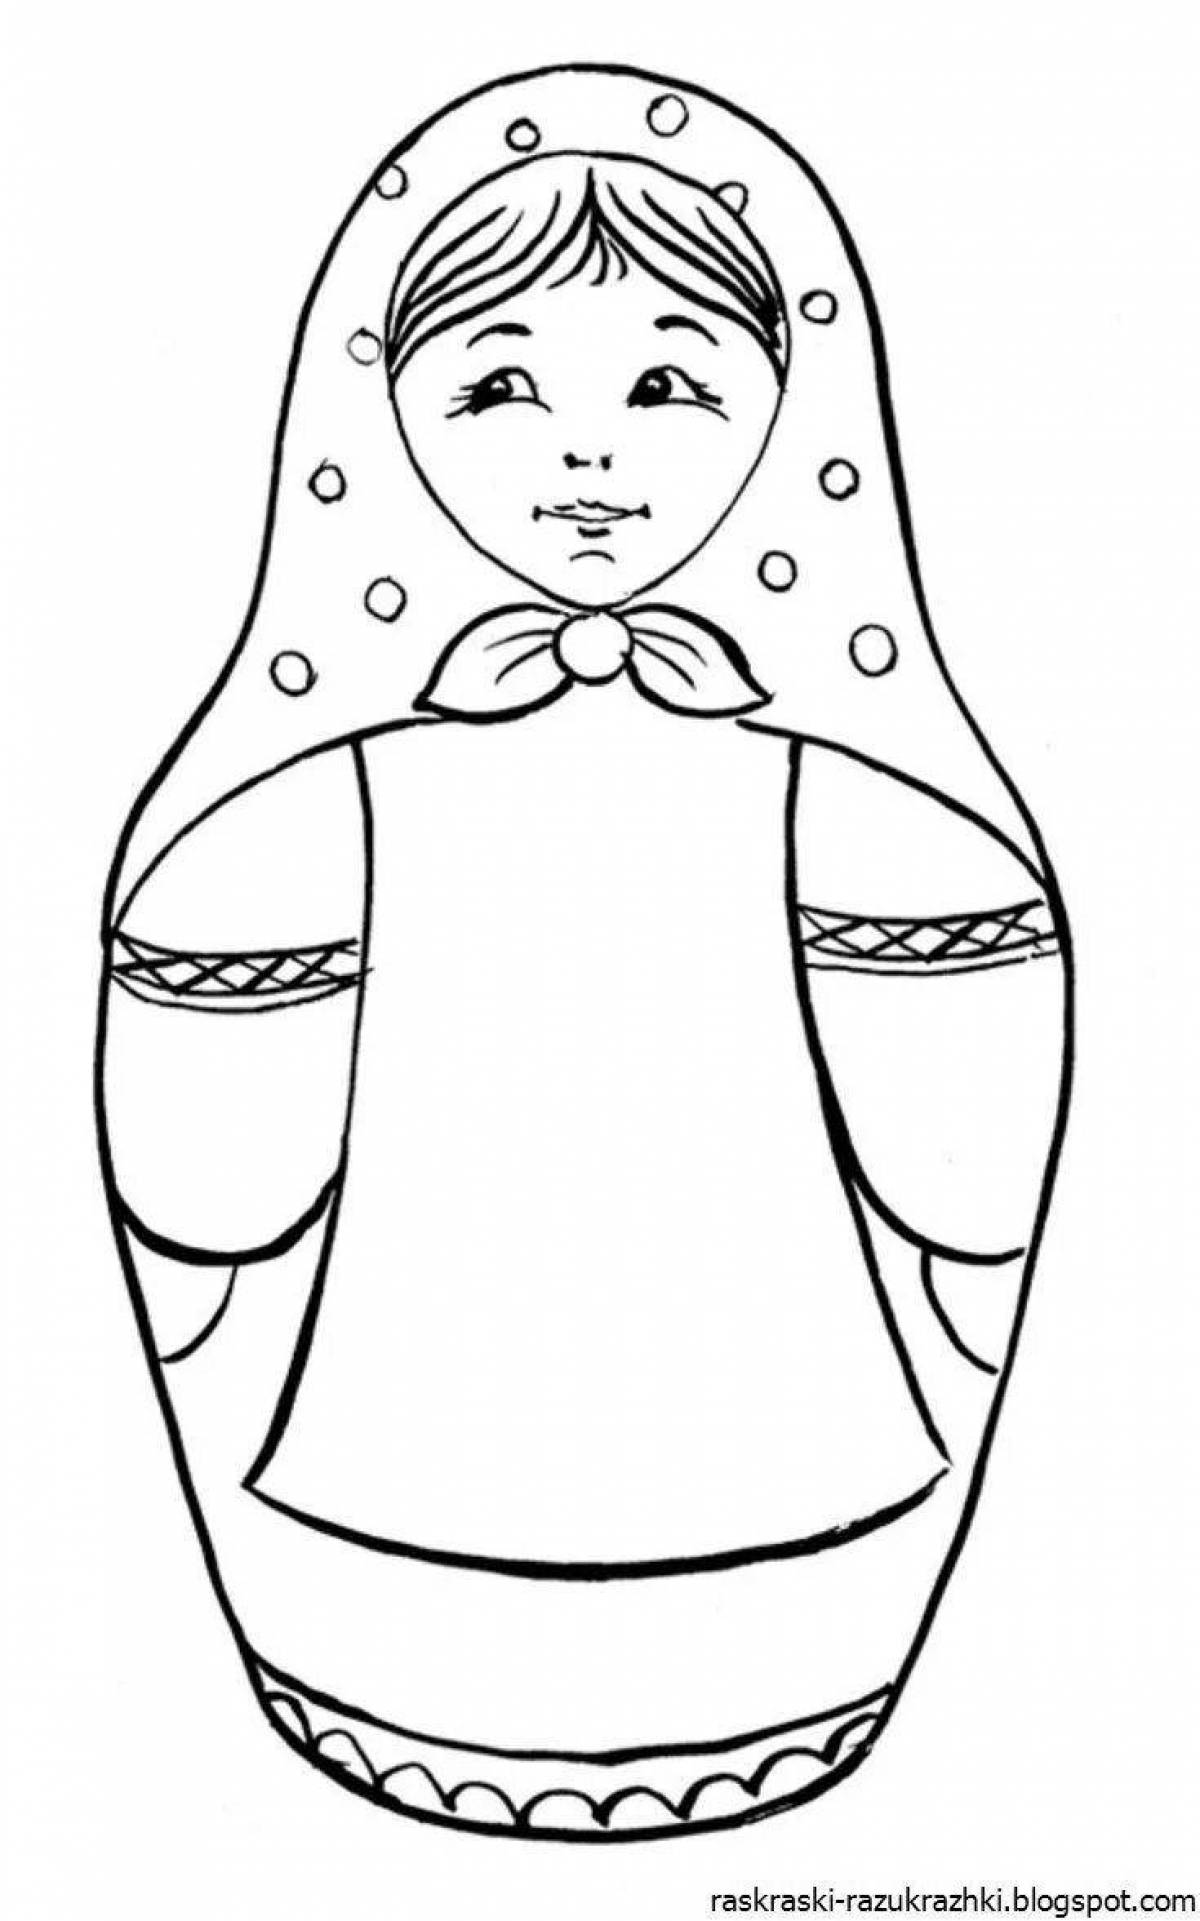 Amazing matryoshka coloring page for kids